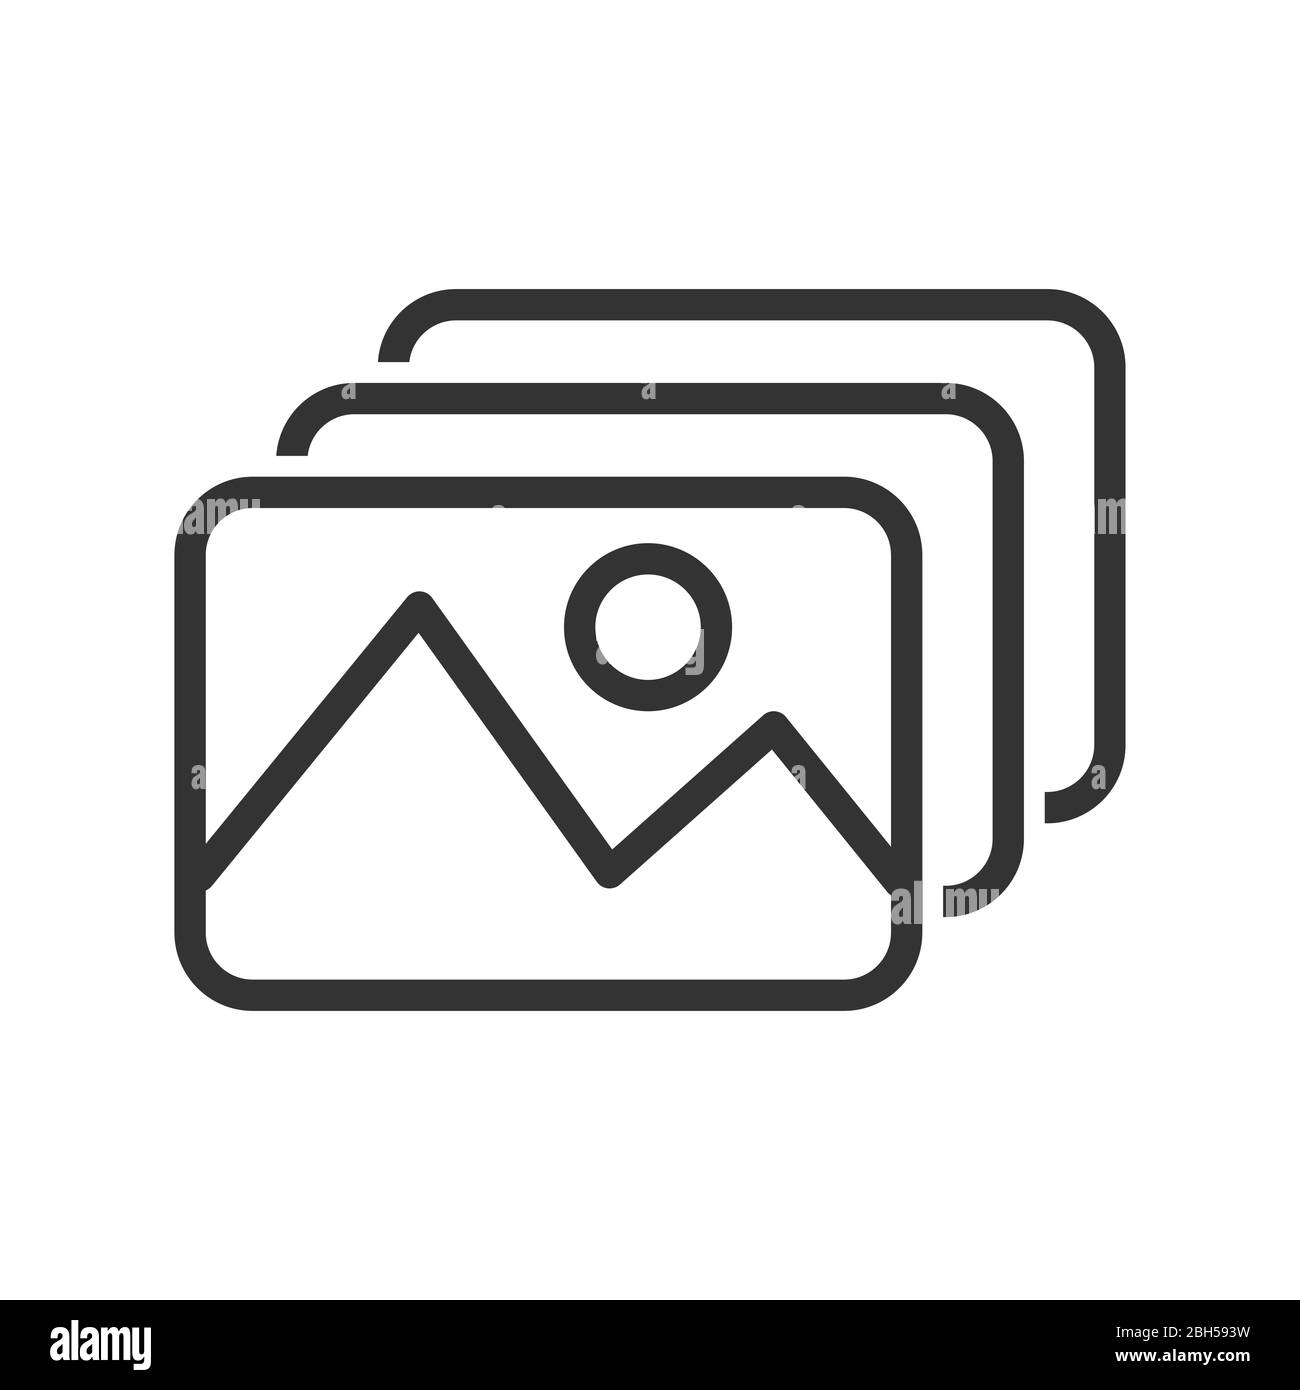 simple gallery or album icon with photos or images. Simple stock design isolated on a white background for websites and apps, empty outline. Stock Vector